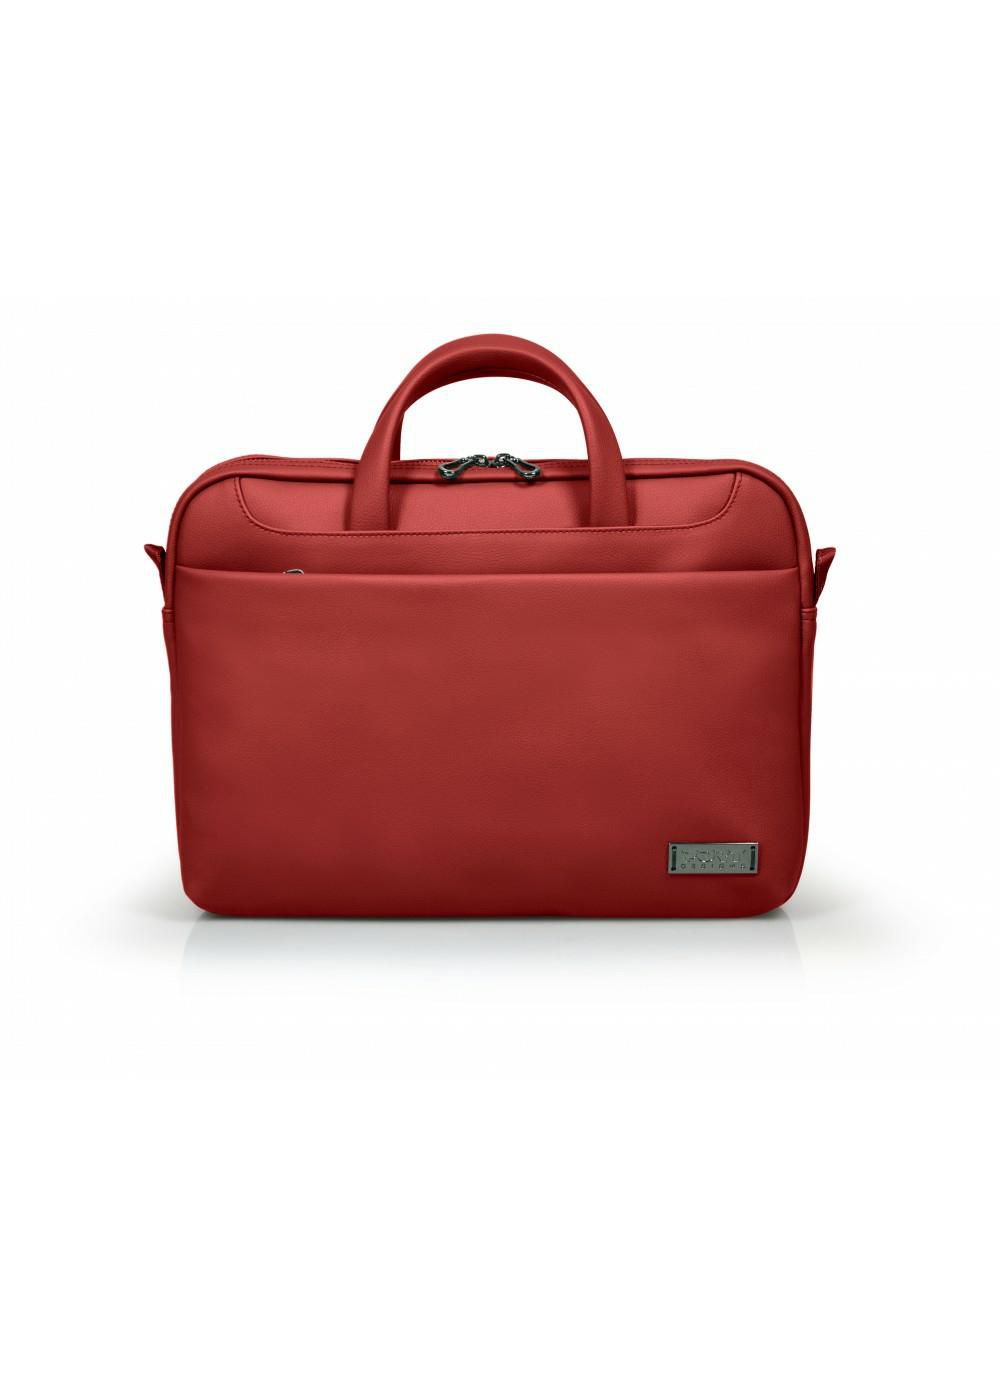 PORT Designs ZURICH TL 14/15.6 RED Simili-leather notebook case